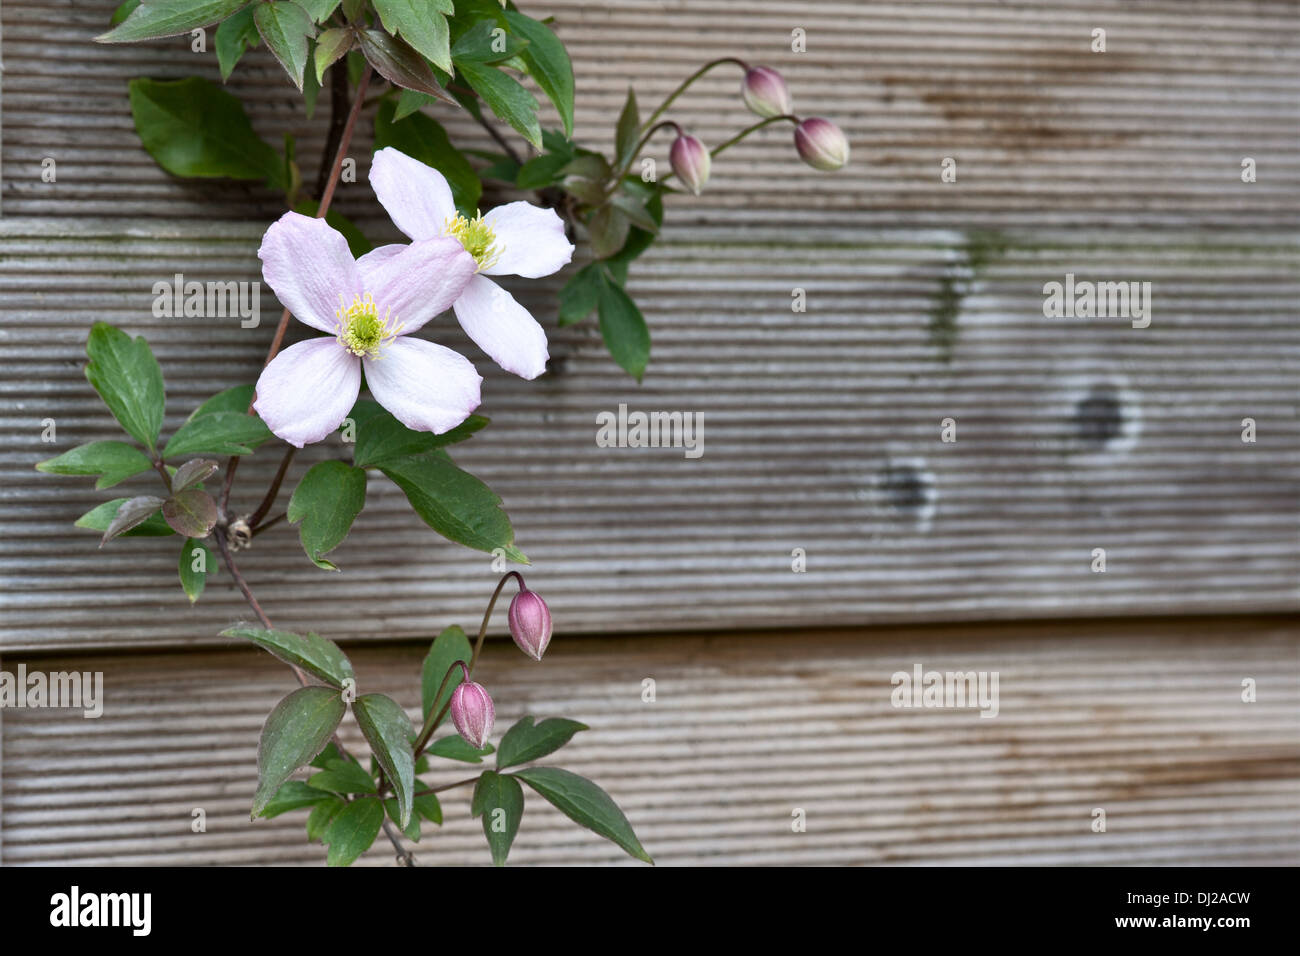 Clematis montana growing against a garden fence, UK Stock Photo